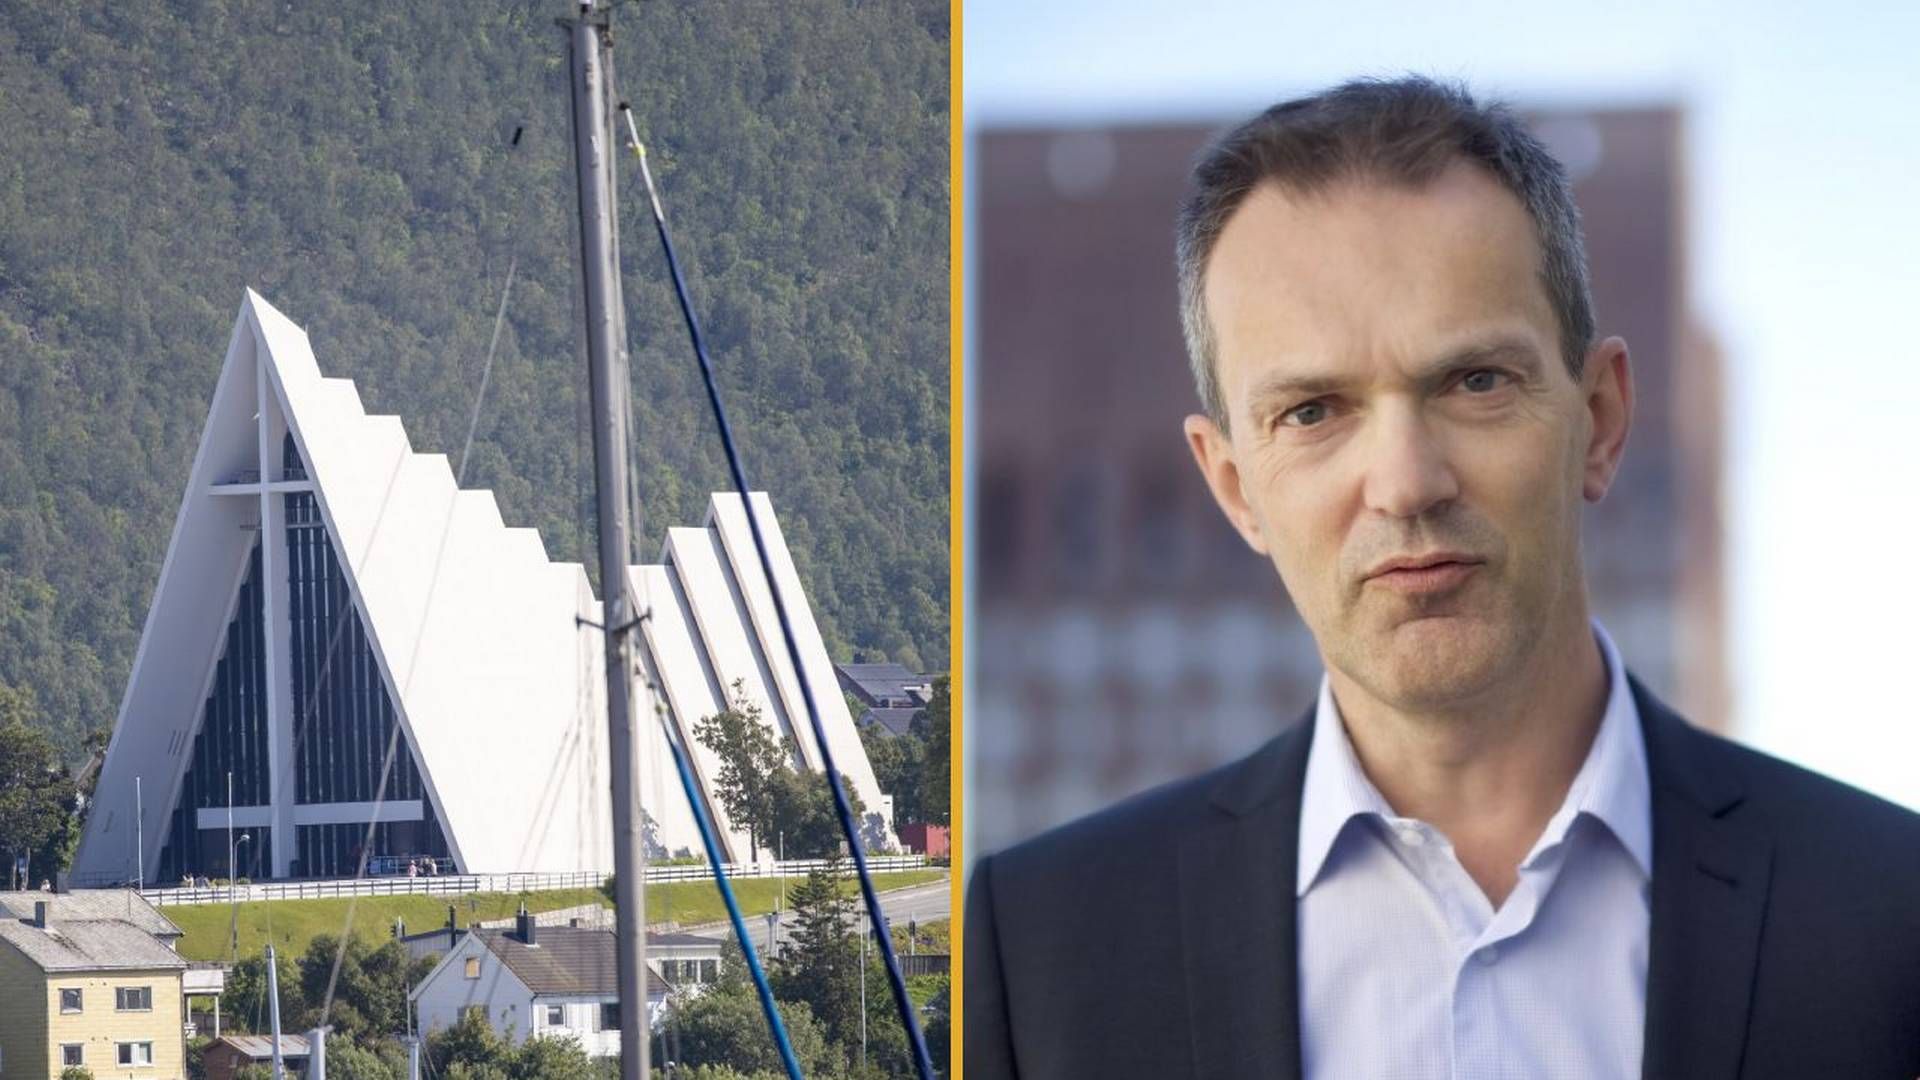 Illustration image. Left: Tromsø landmark Tromsdalen Church, commonly nicknamed Ishavskatedralen, which means "The Cathedral of the Arctic Ocean". To the right: Folketrygdfondet CEO Kjetil Houg, who recommends that a management unit in Tromsø should look at listed Nordic equities outside the benchmark indices.